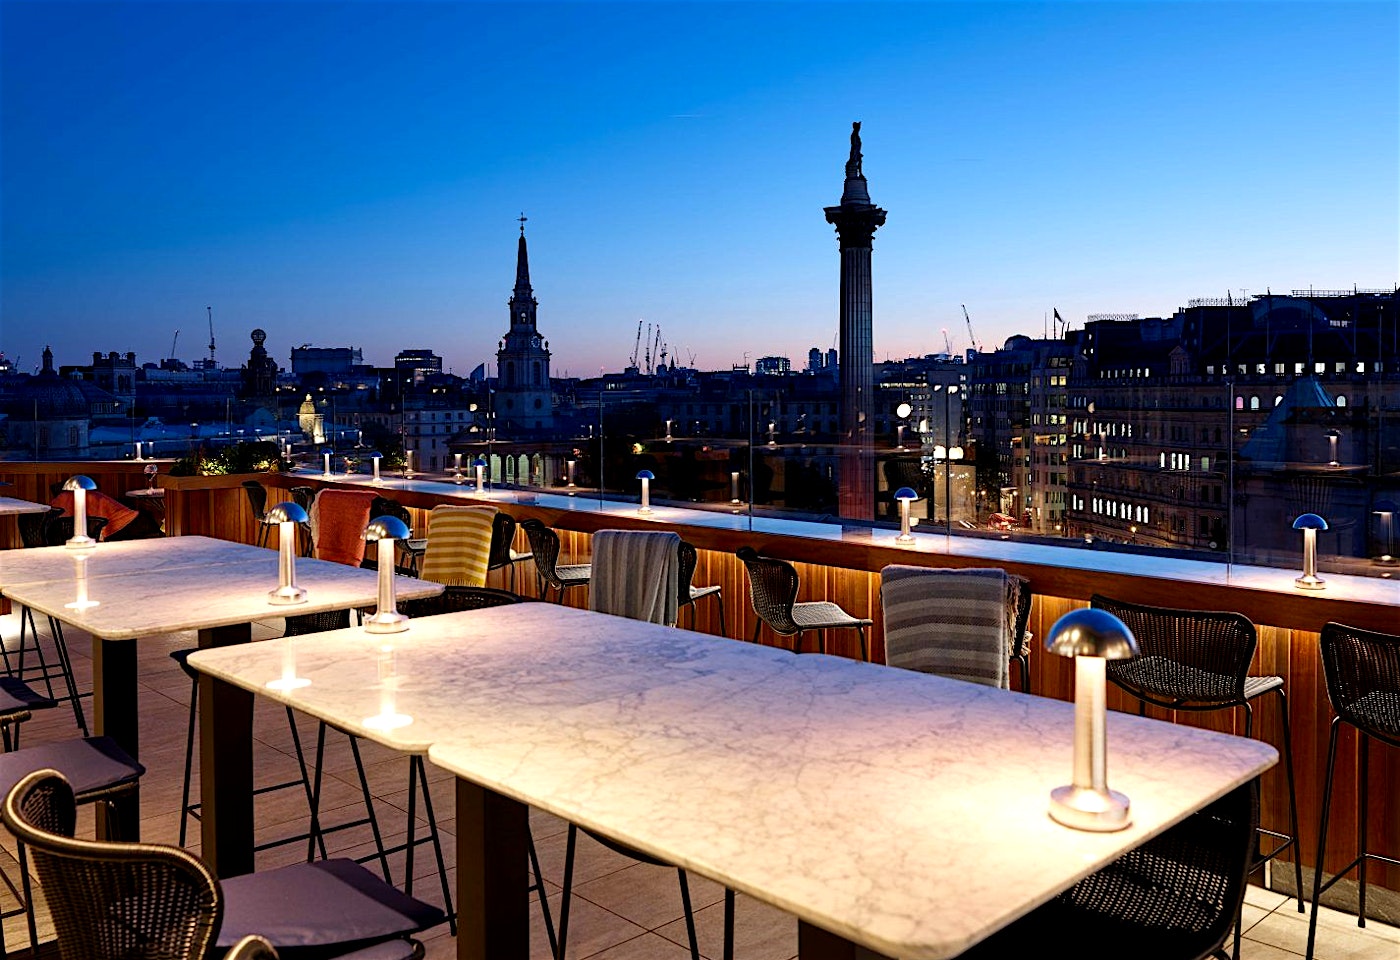 The Trafalgar st james roofotp bar leicester square